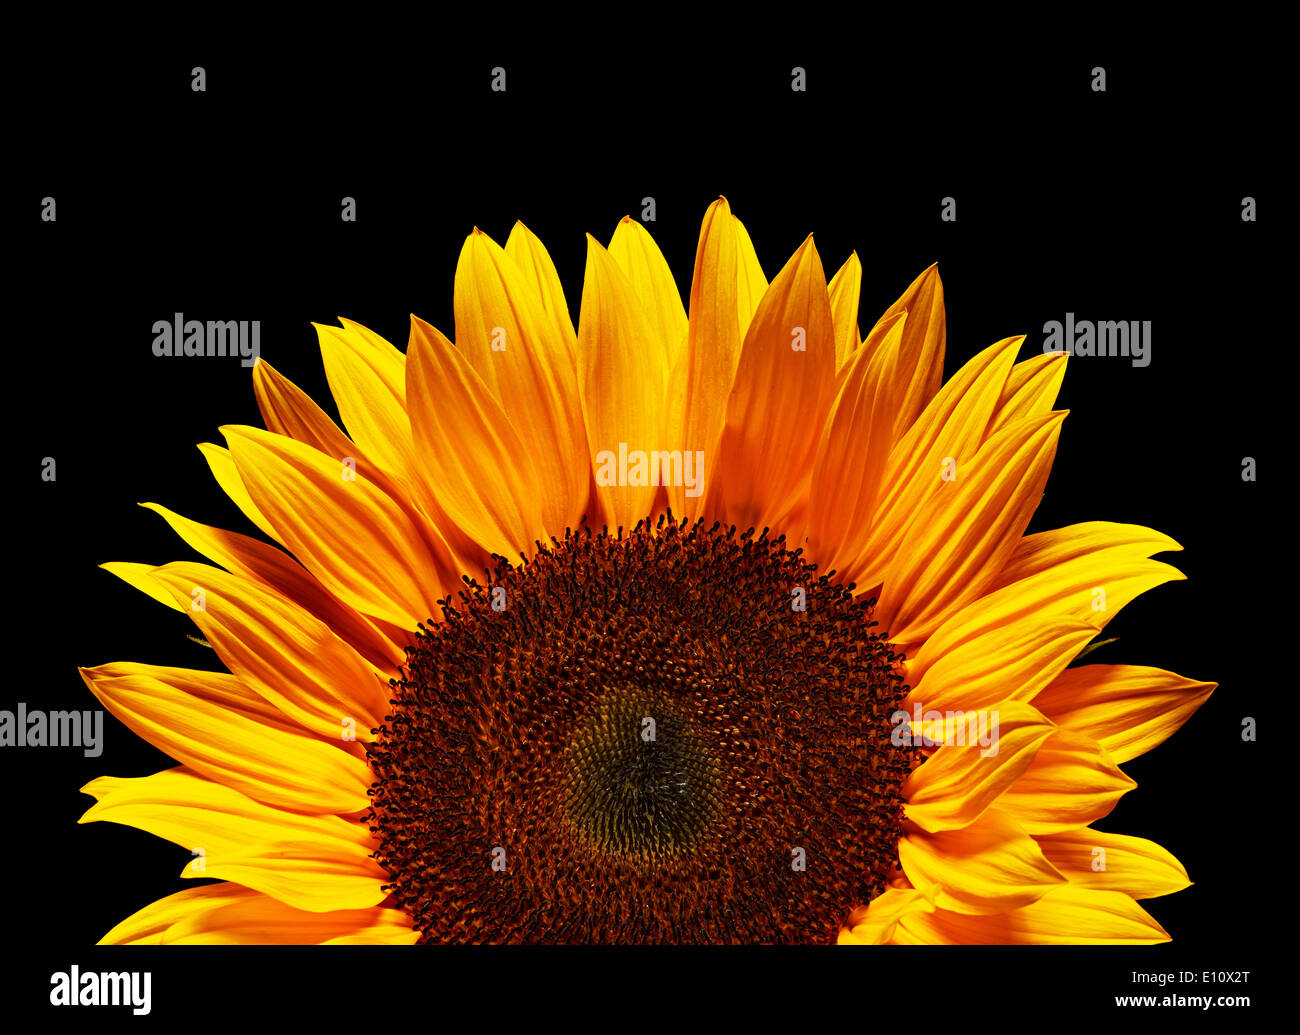 Vivid yellow sunflower over a black background Stock Photo